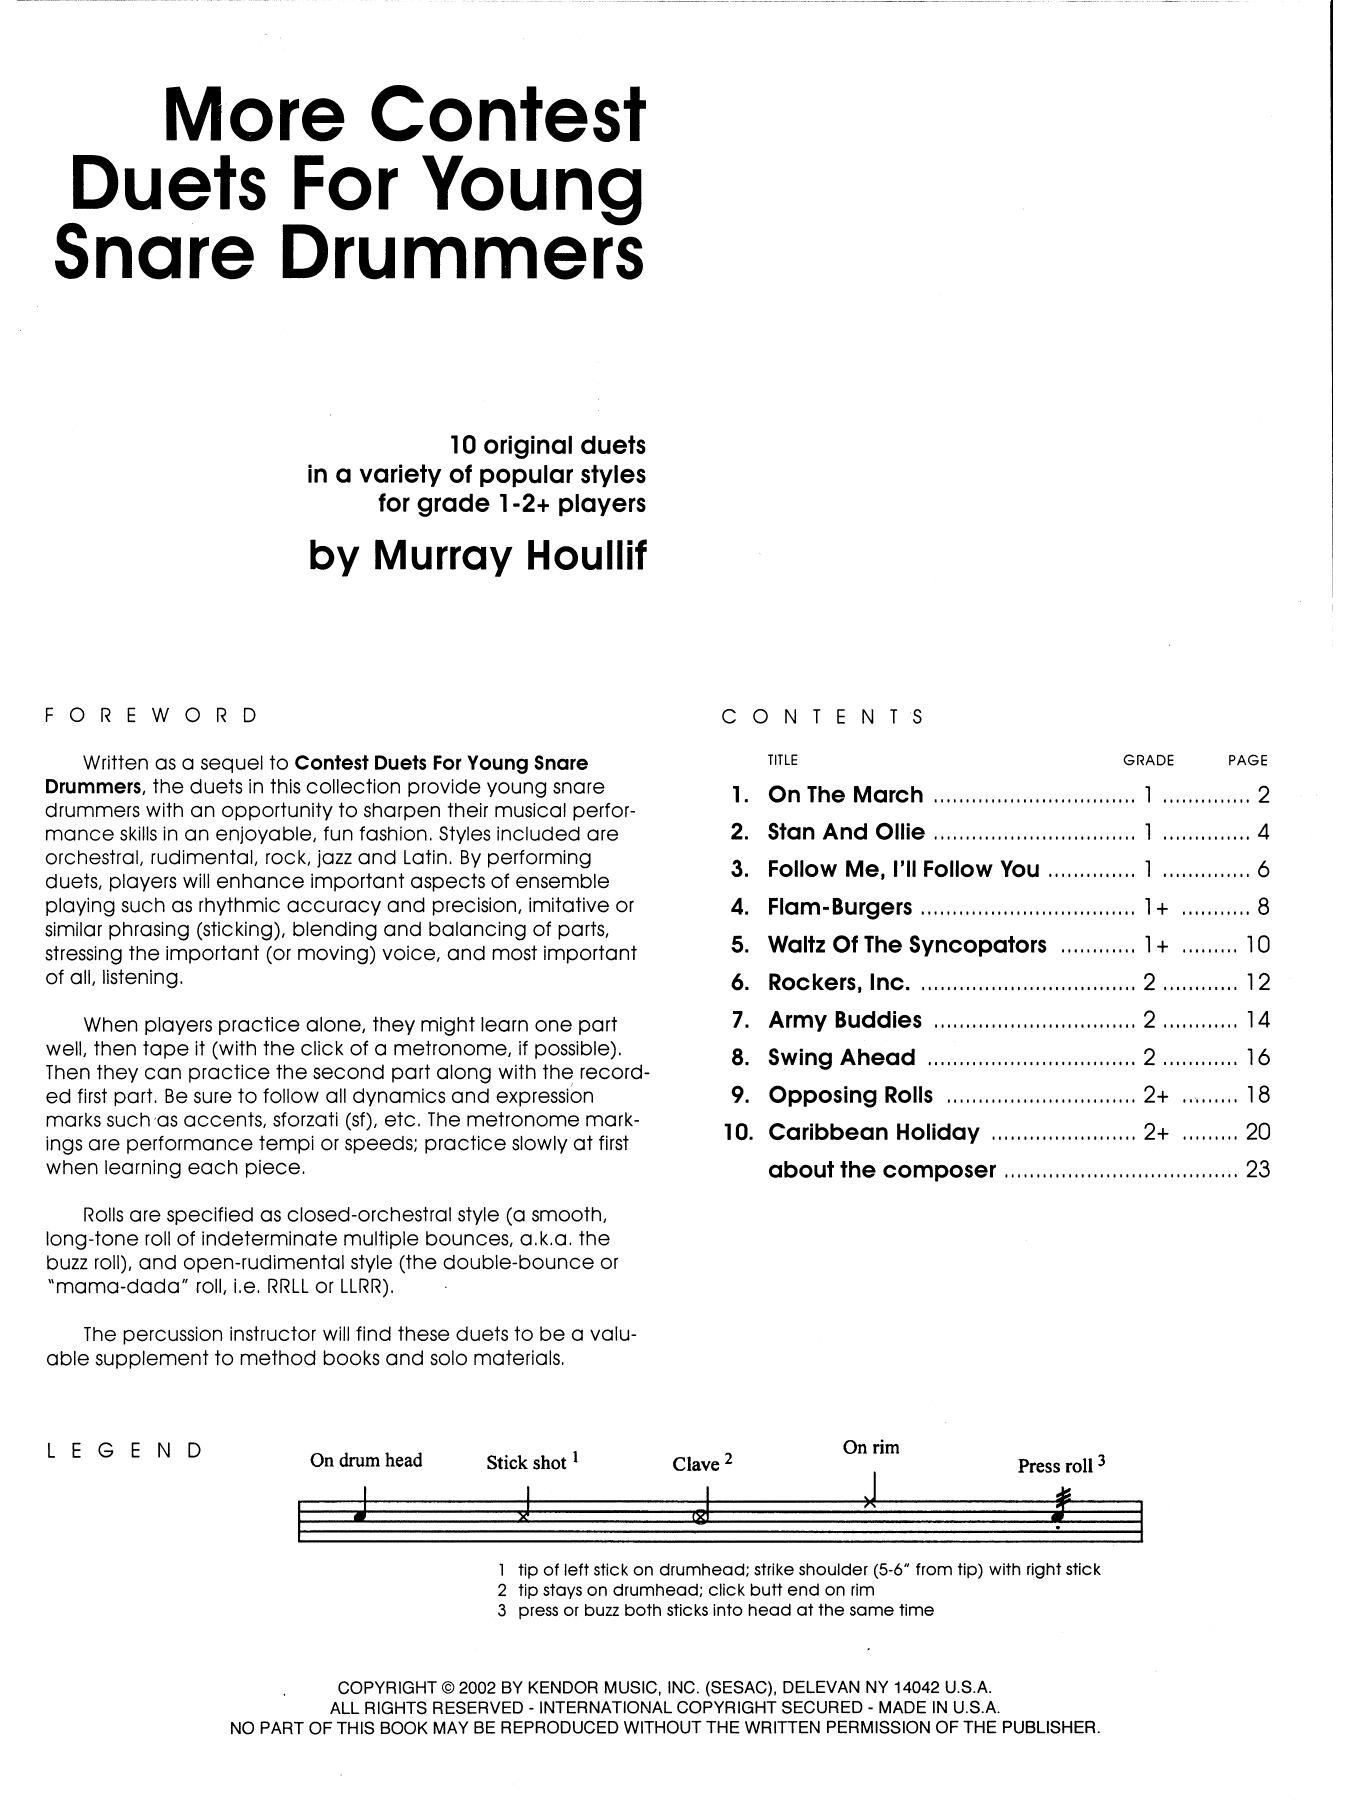 Download Murray Houllif More Contest Duets For Young Snare Drum Sheet Music